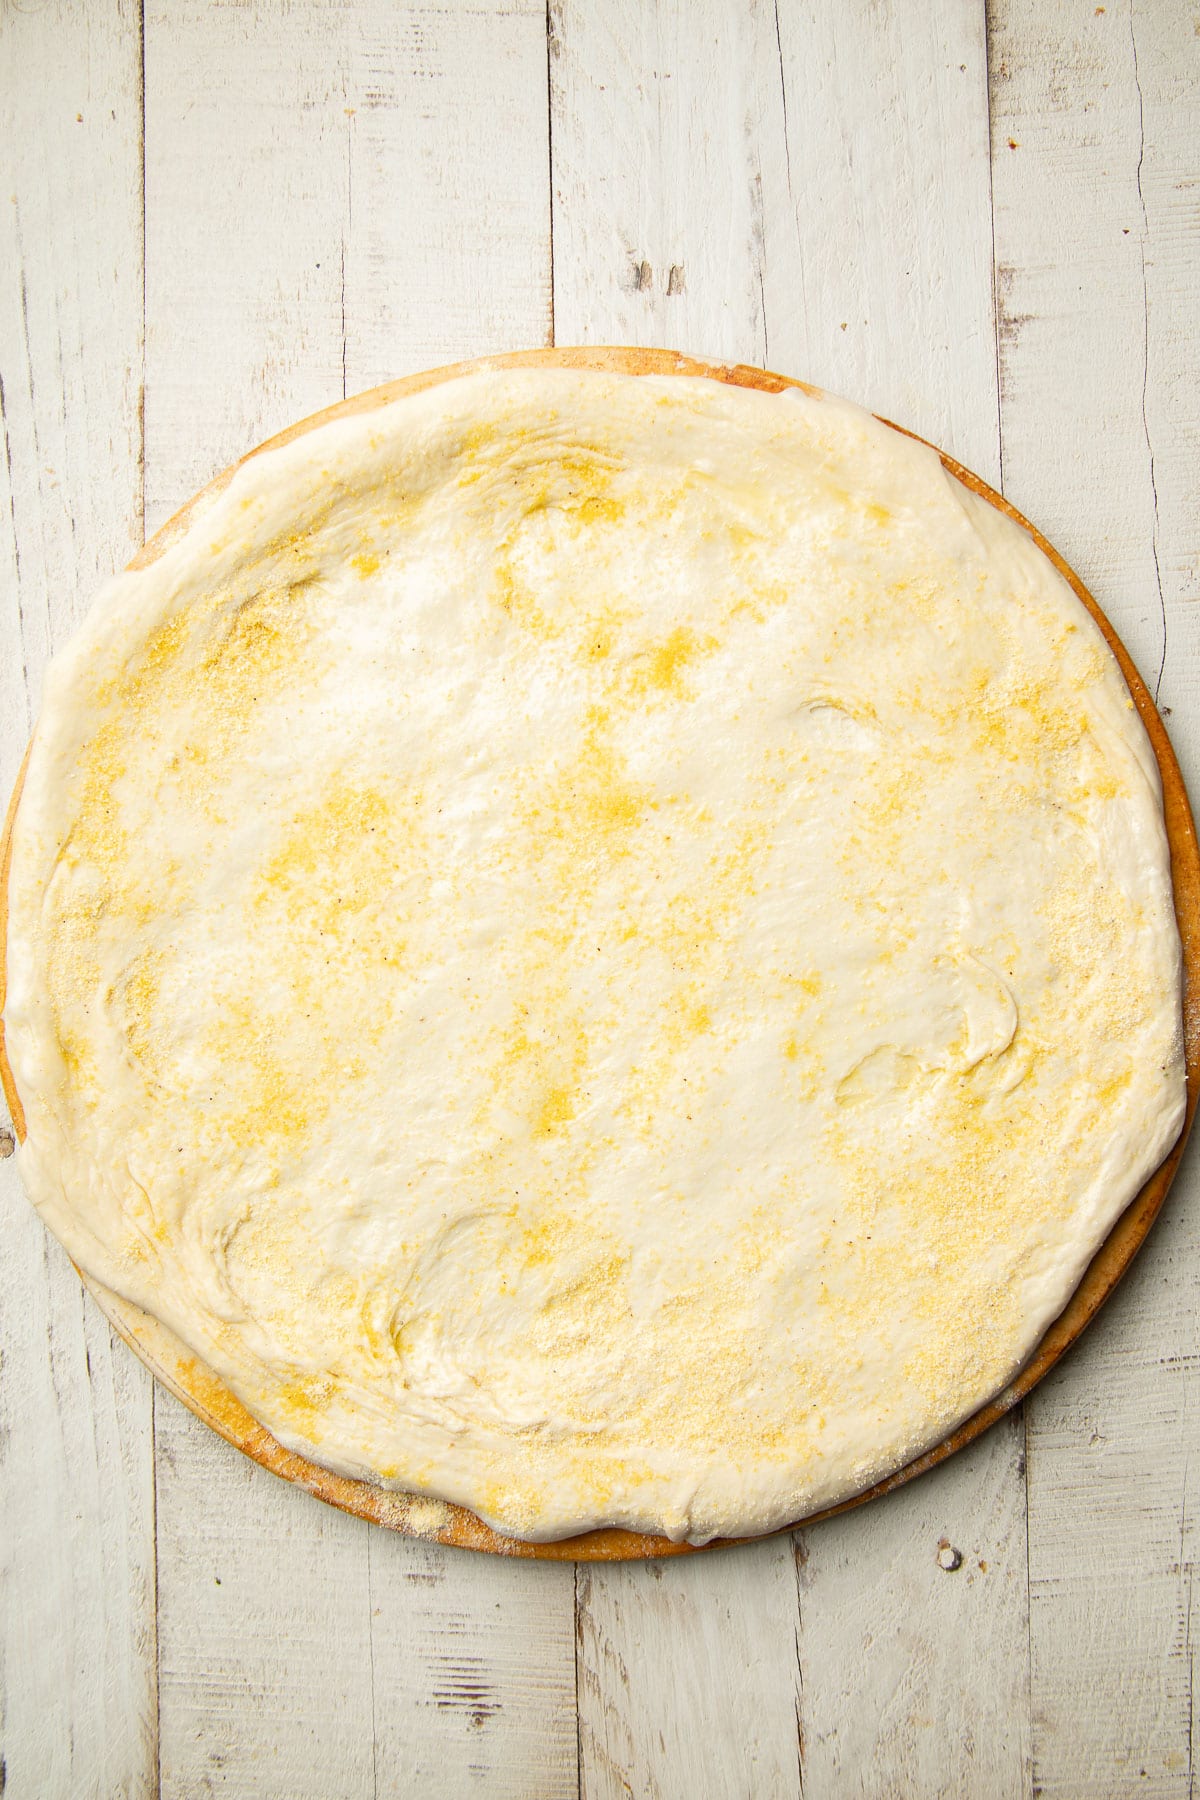 Unbaked pizza crust on a pizza stone.